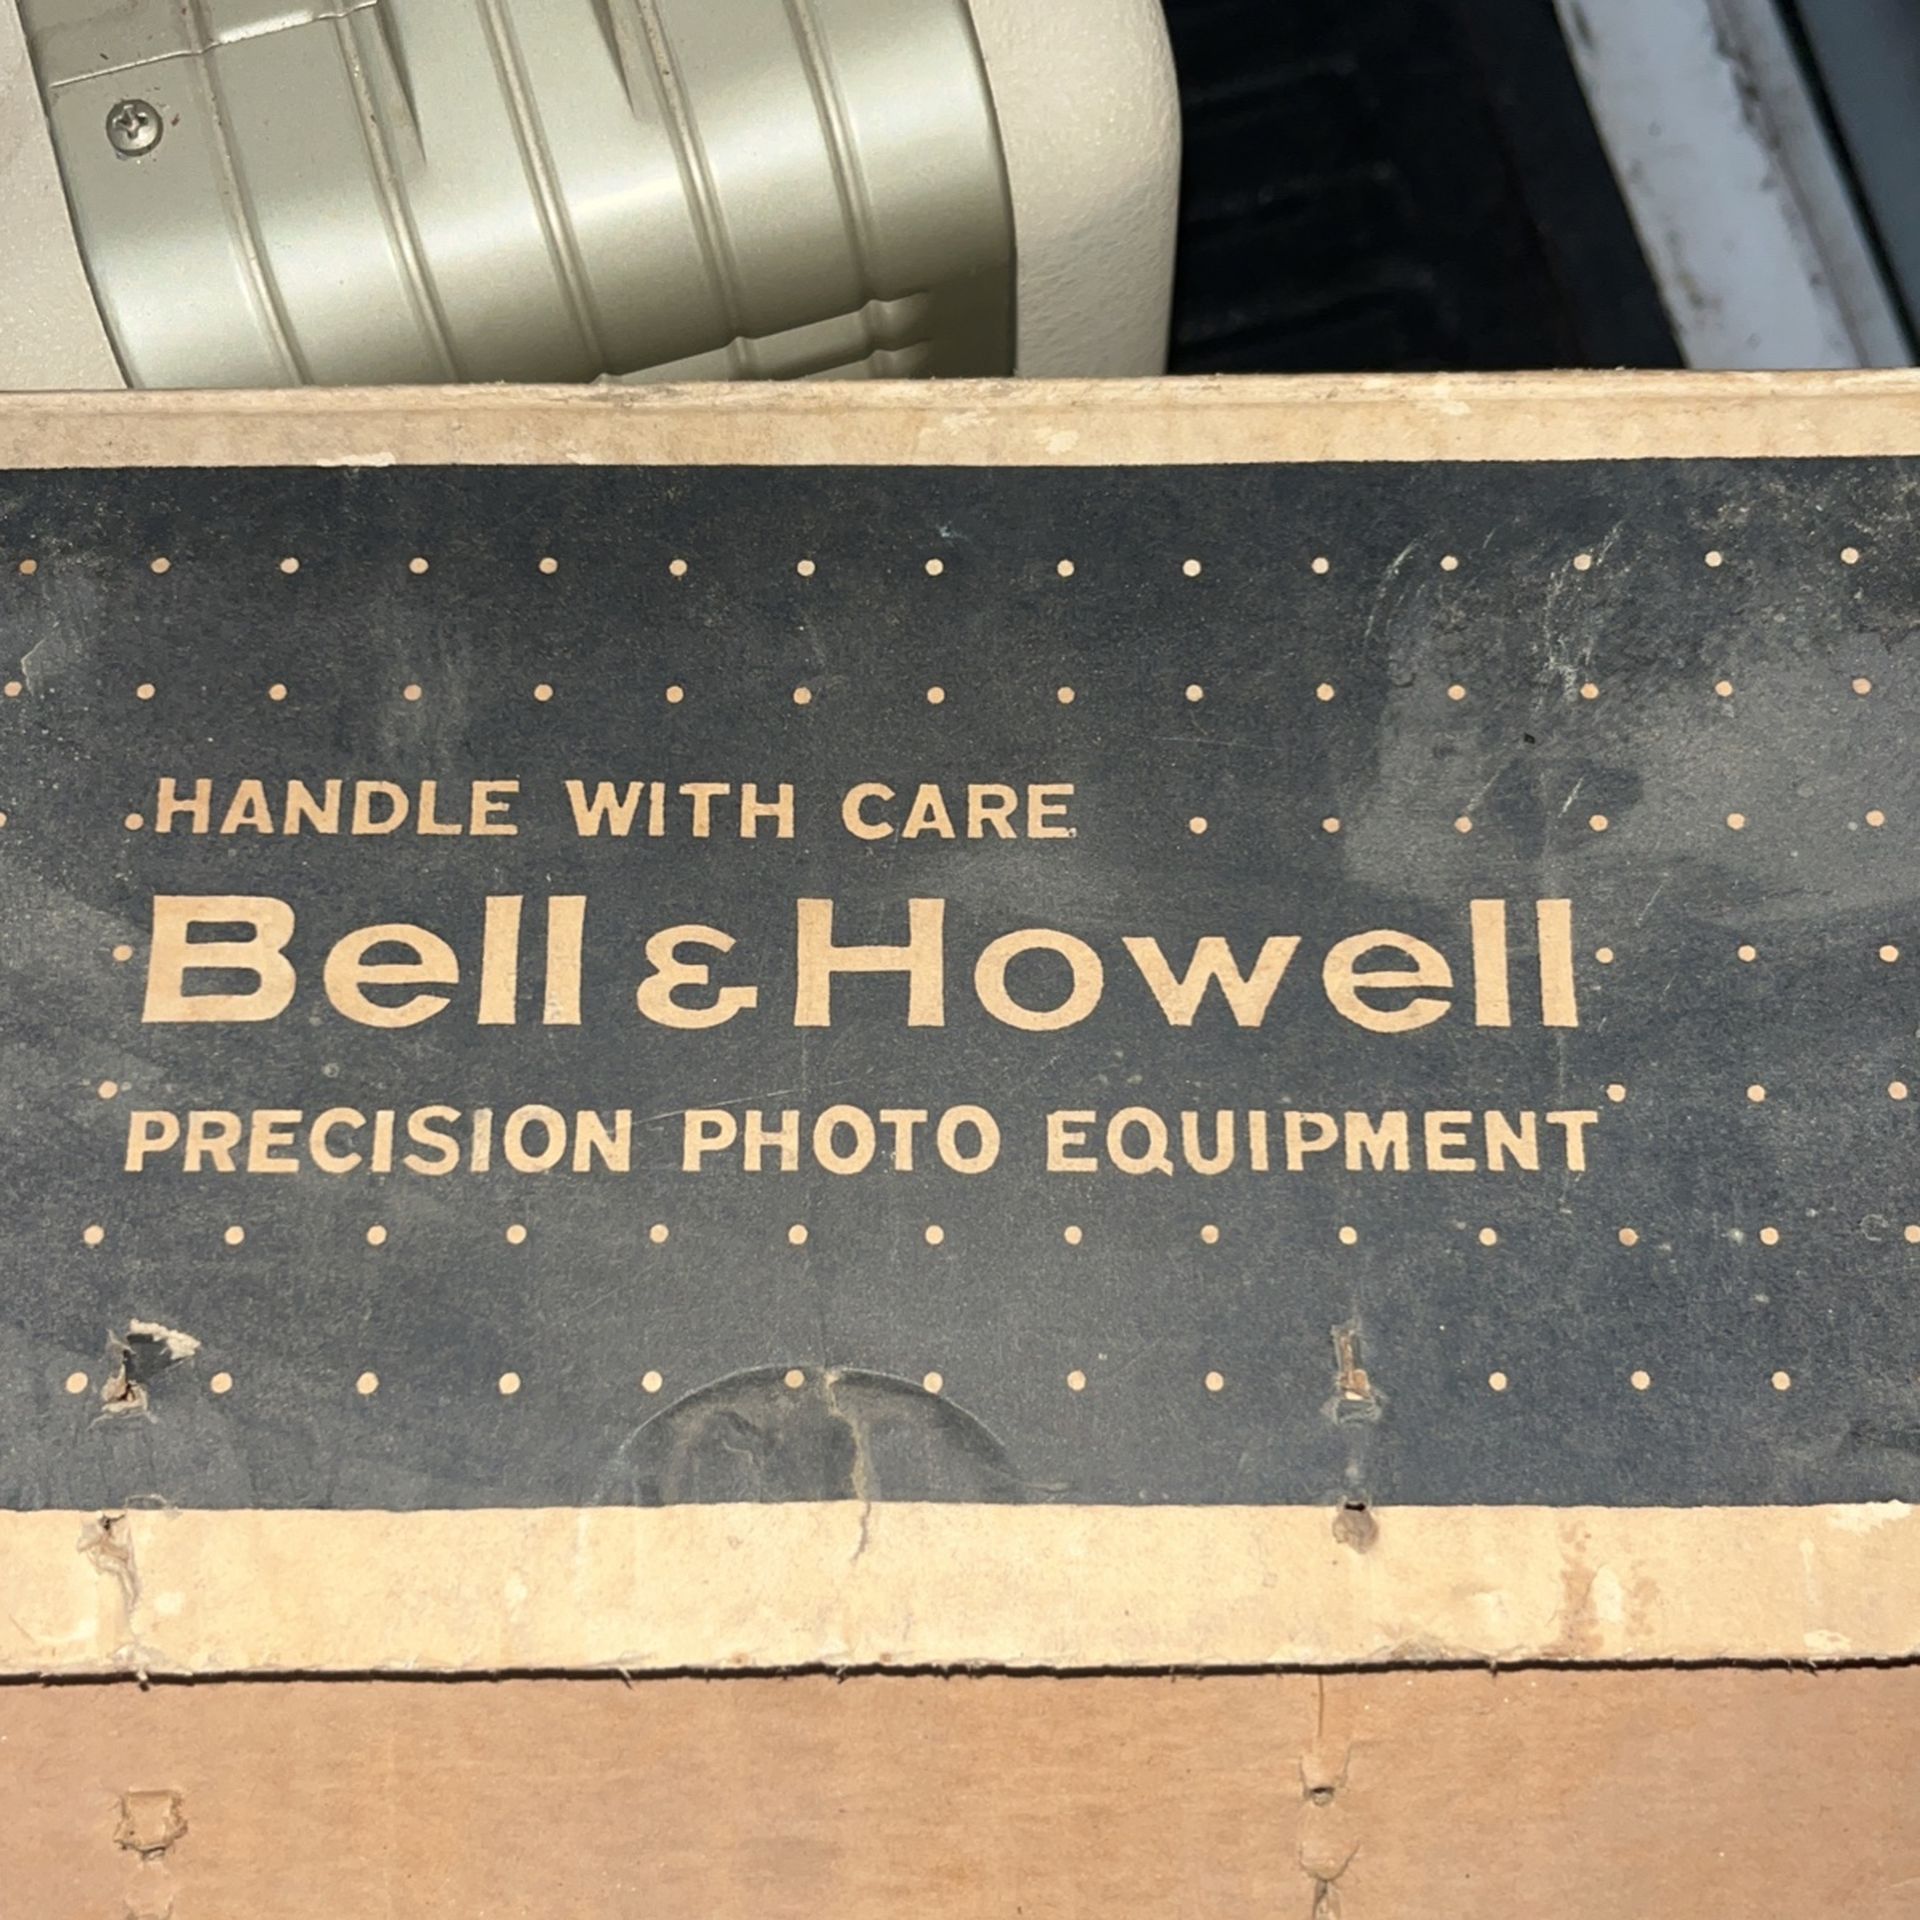 Bell & Howell Precision Photo Equipment